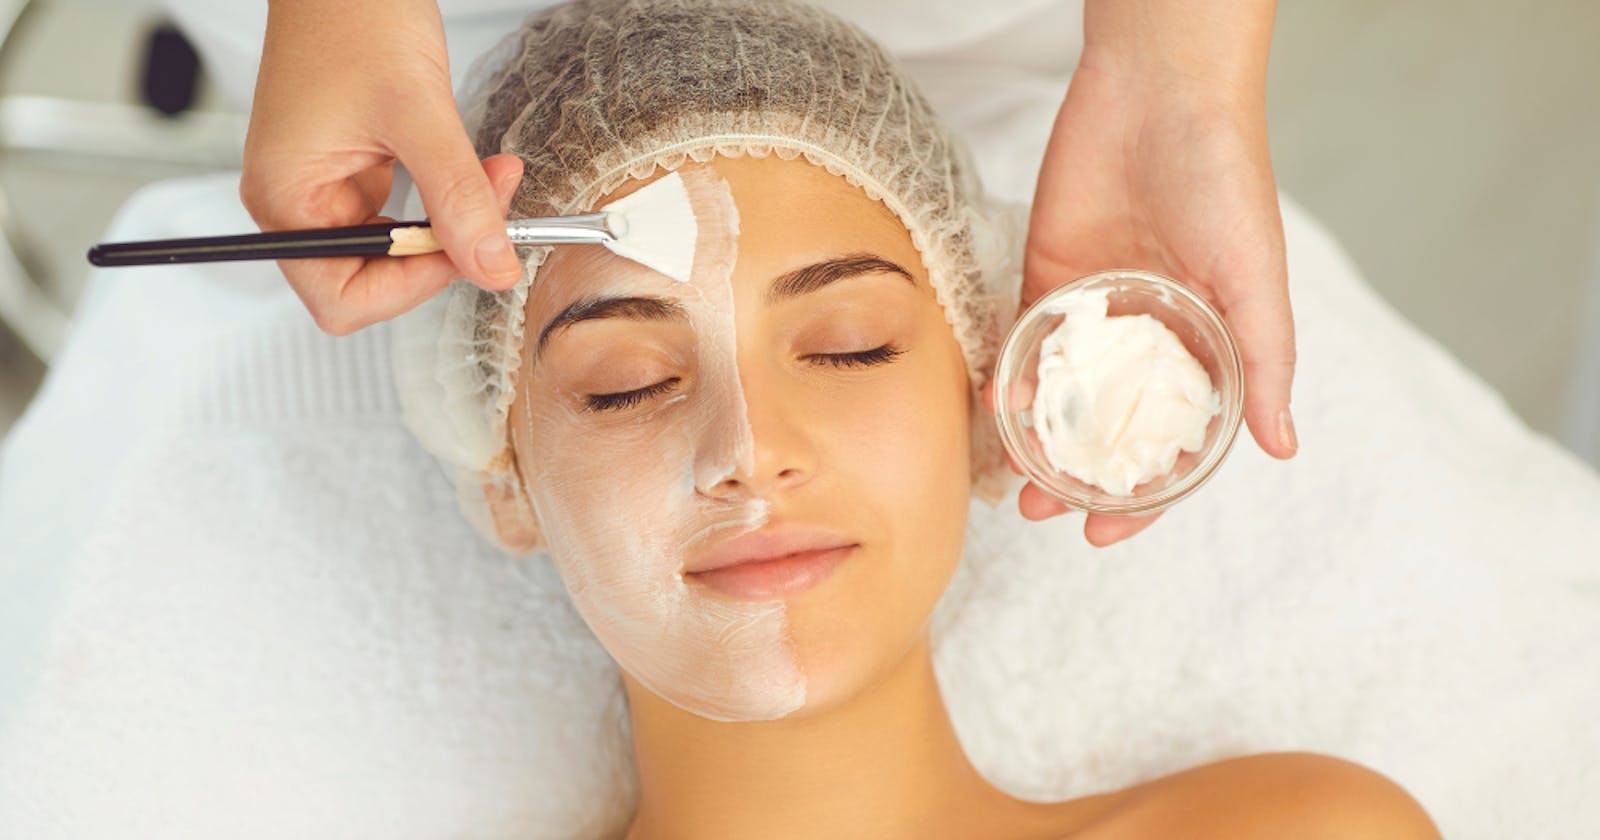 Natural Skin Care: What It Is, Benefits, Myths, And More